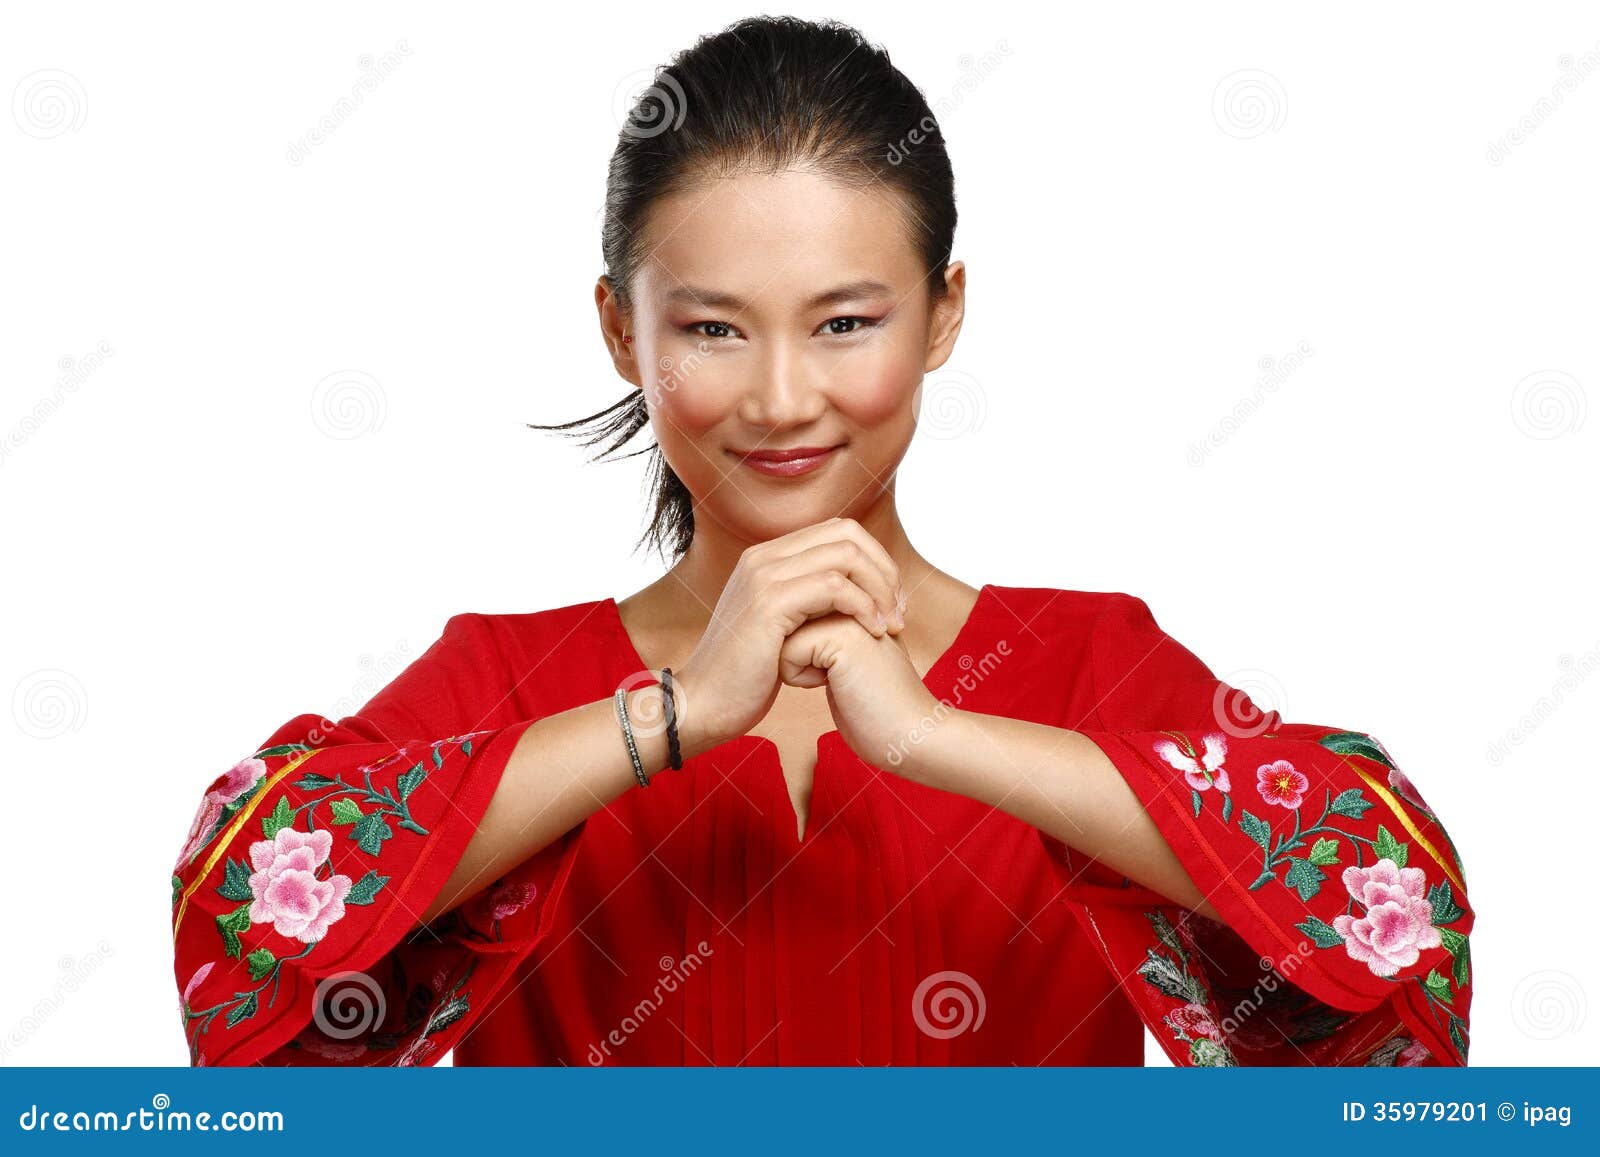 This Greeting The Asian Woman 15